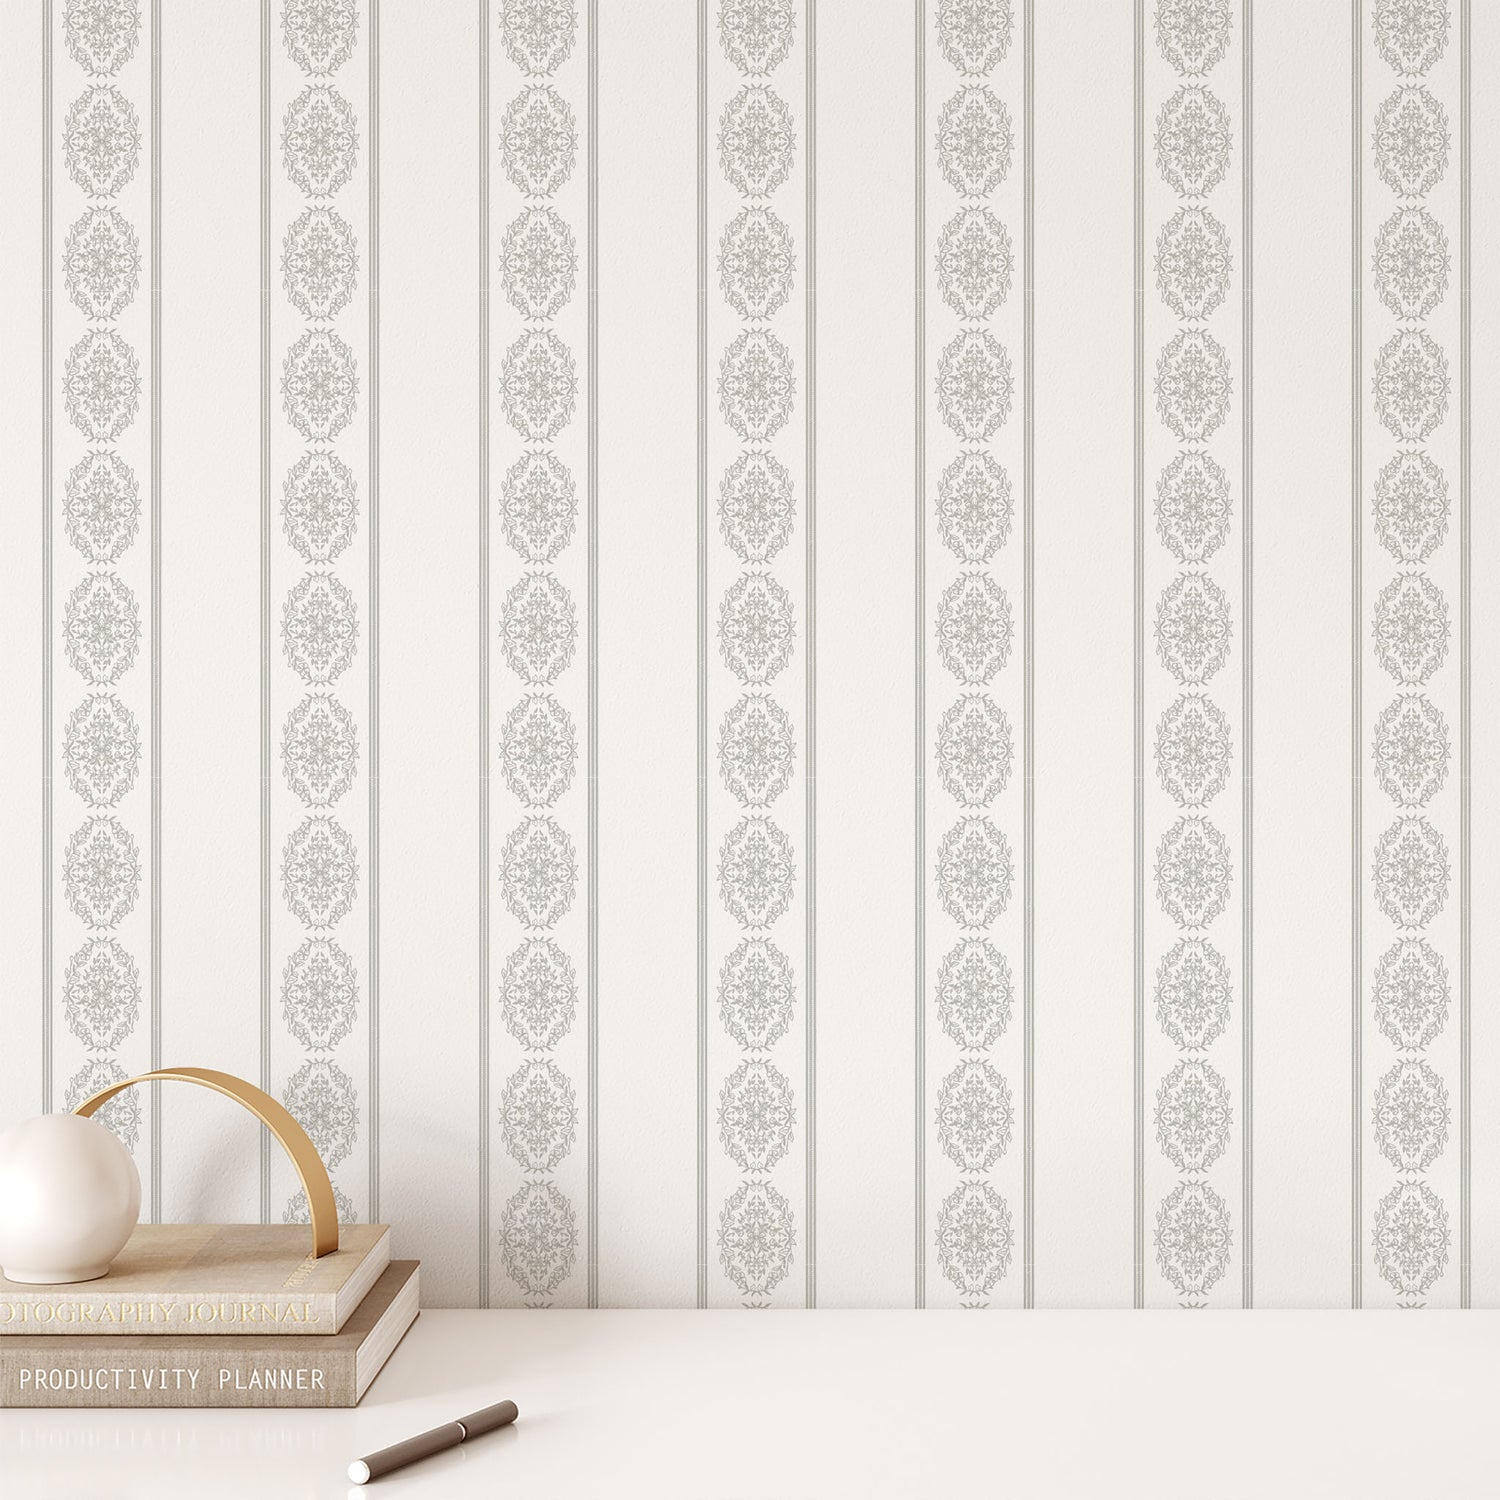 Made with top-quality materials, this wallpaper is the perfect choice for adding a touch of elegance to your space shown in a full size image.